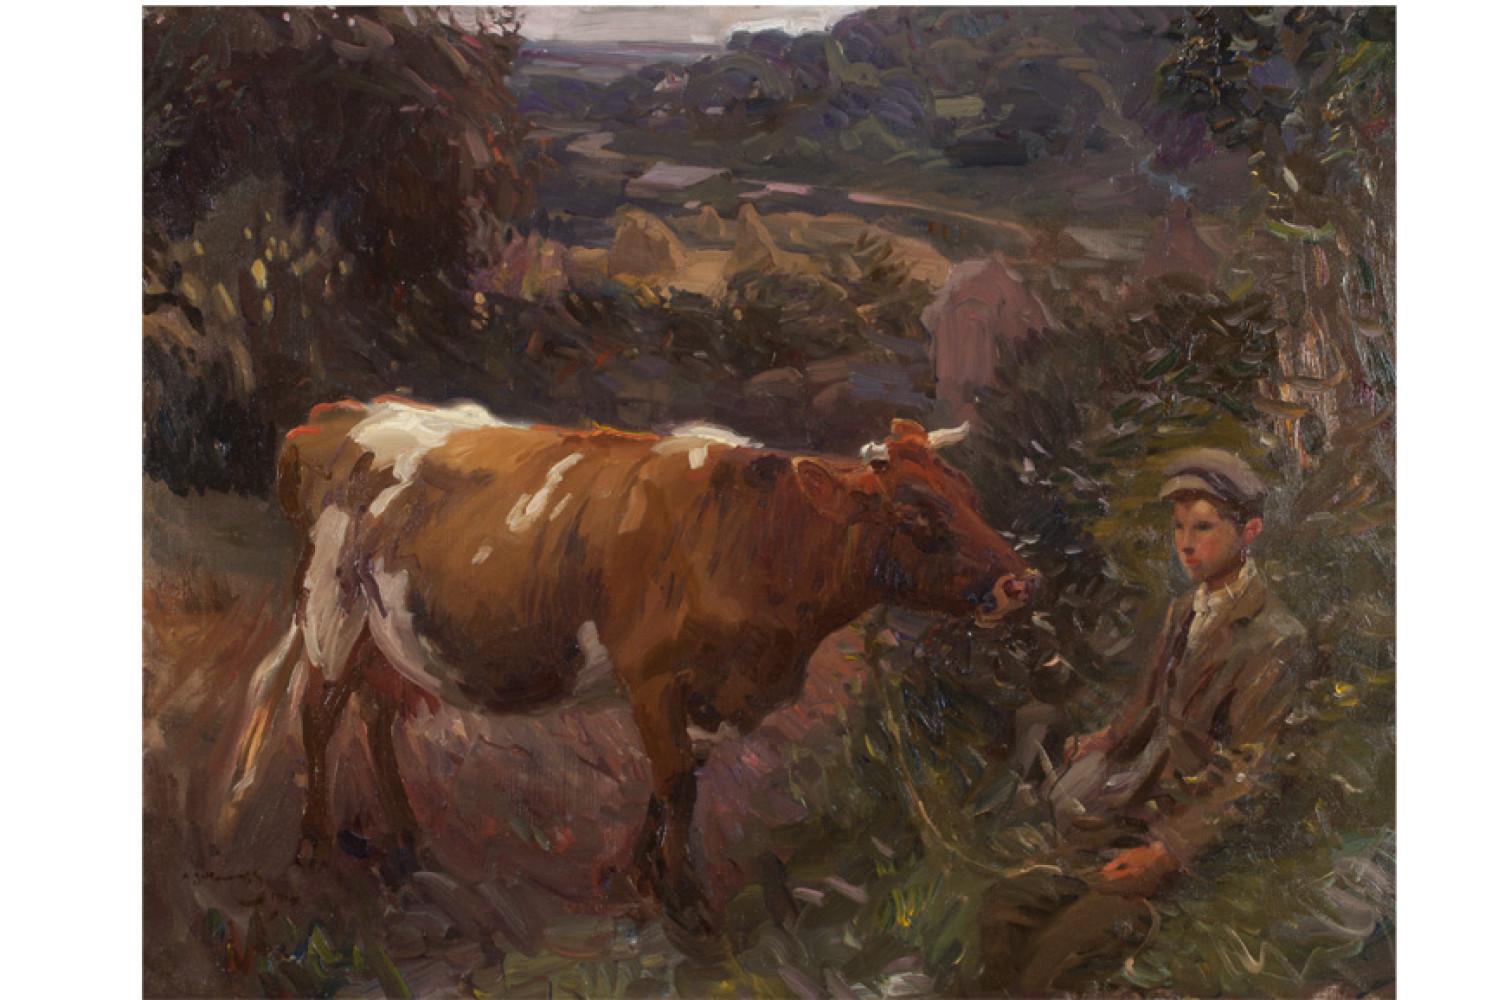 Young Herdsman at Mendham, 1910, By Sir Alfred Munnings (British, 1878—1959); Oil on canvas; 28 1/4 x 36 inches; Image courtesy of Penkhus Collection